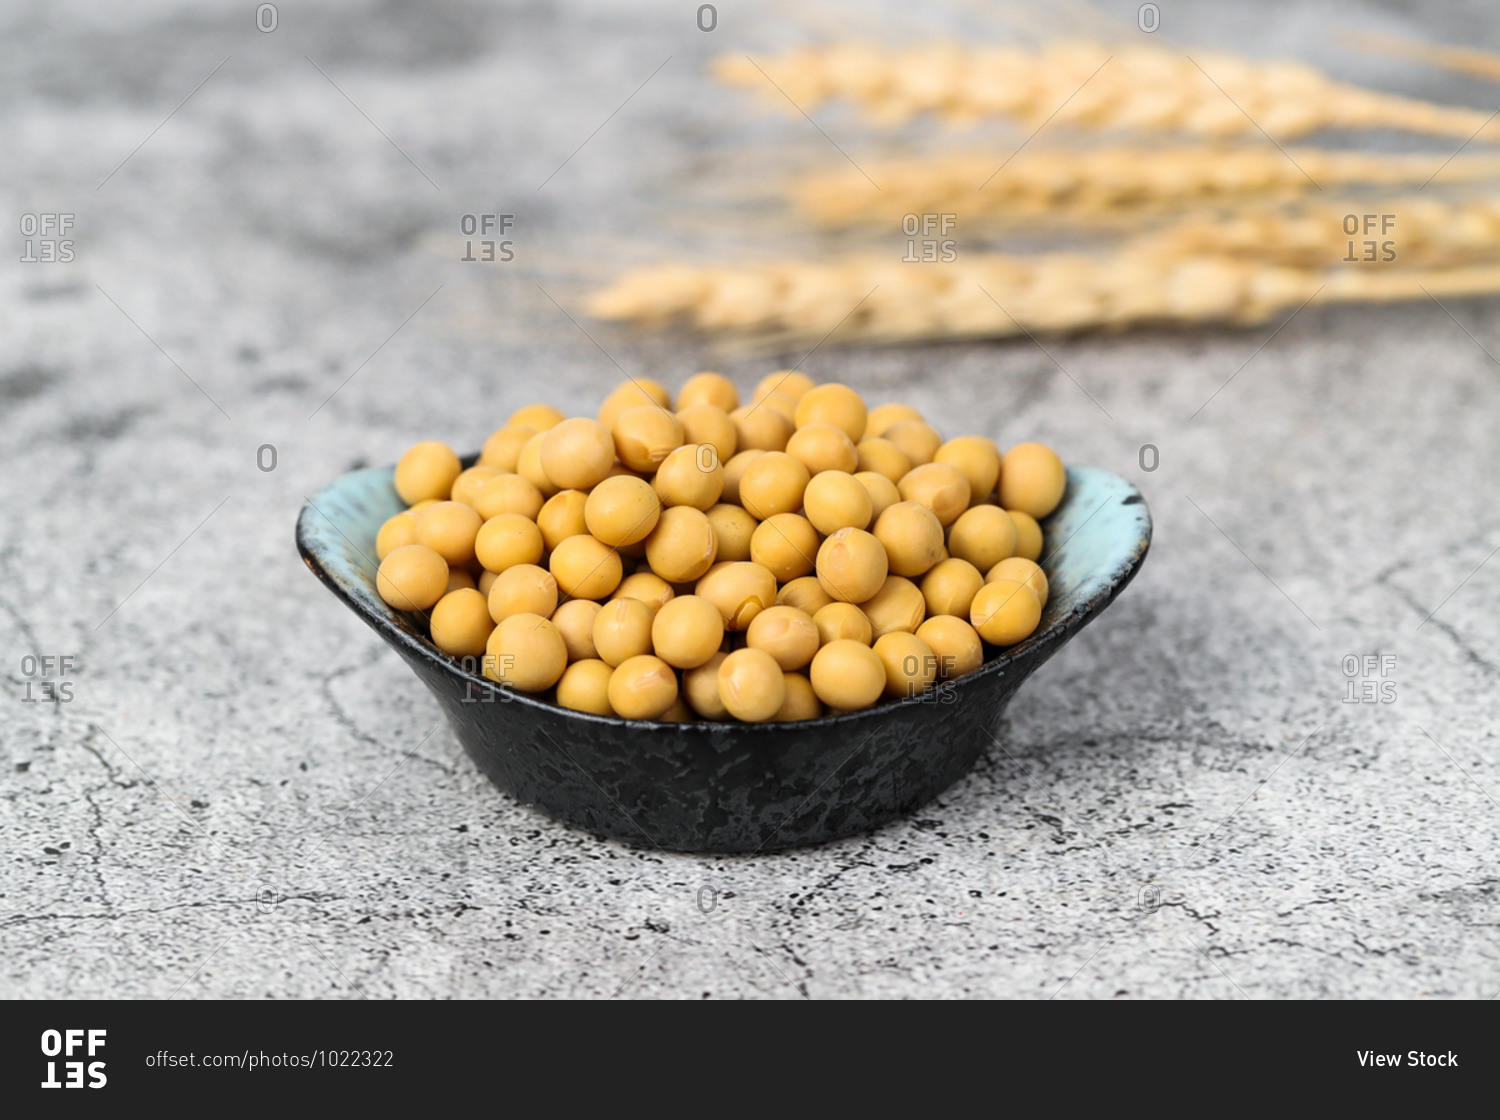 Shot of a soybean in a dish